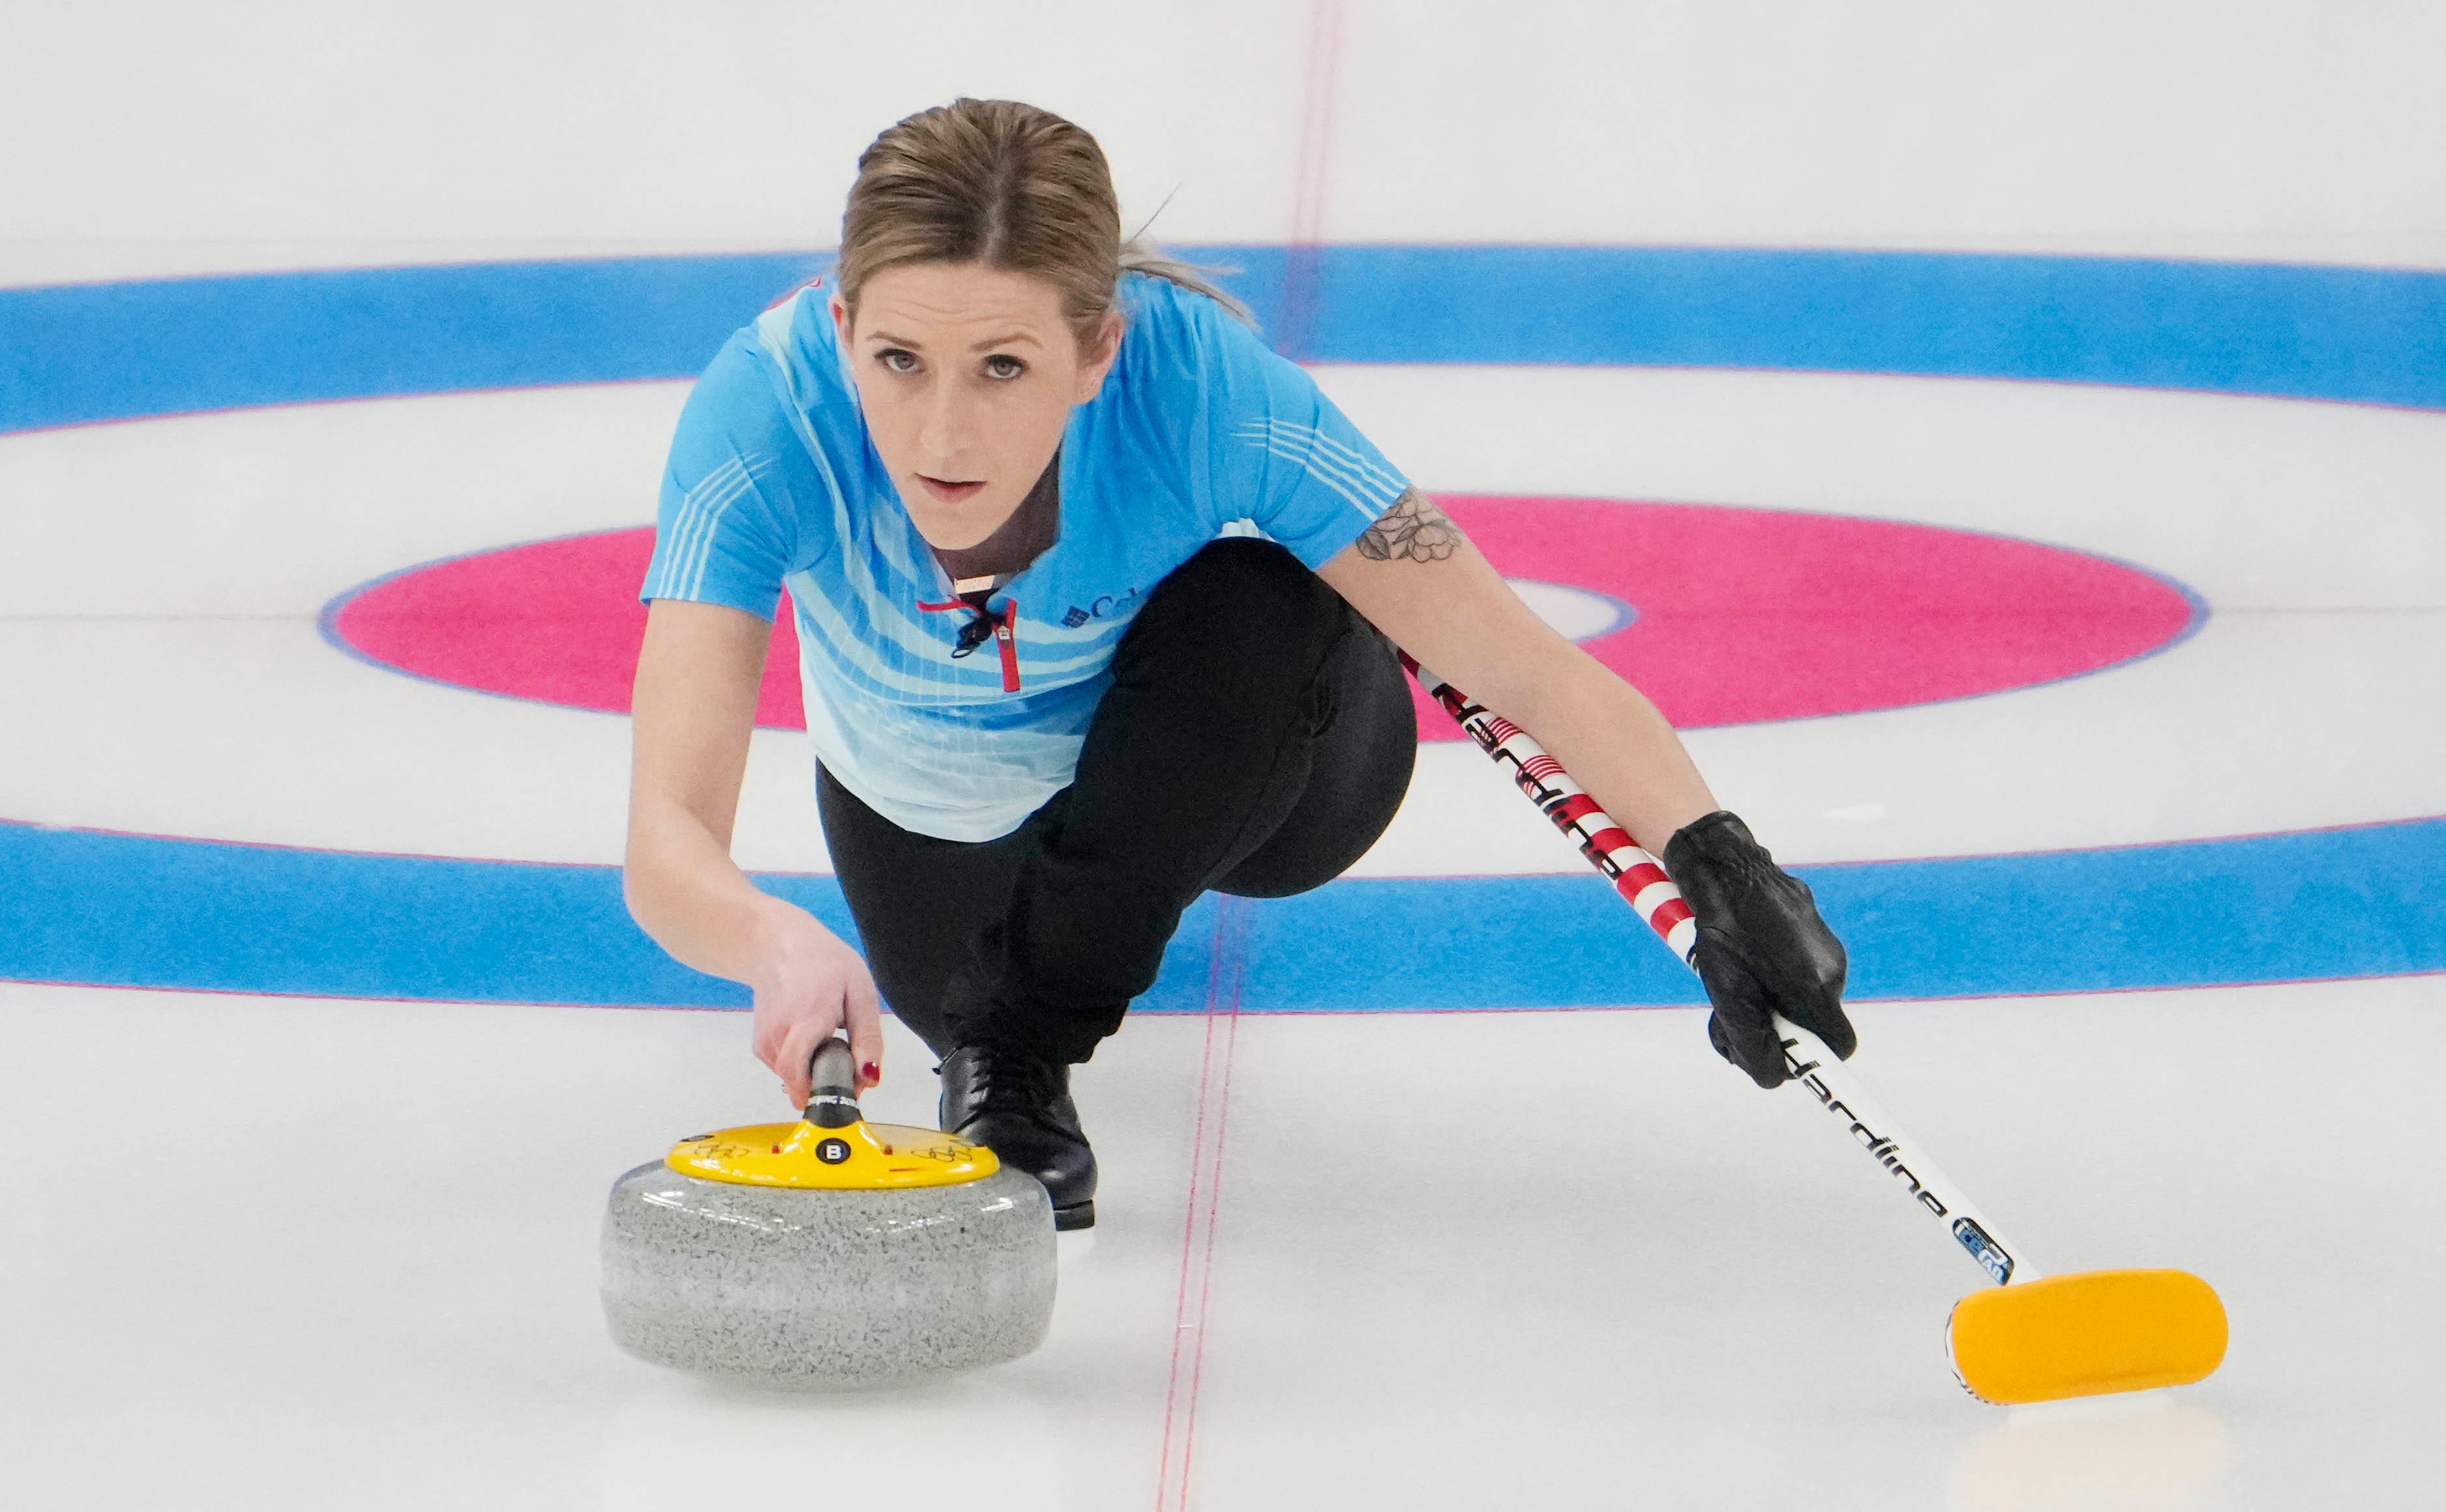 Curling Rules At Winter Olympics Scoring Rules, Terminology